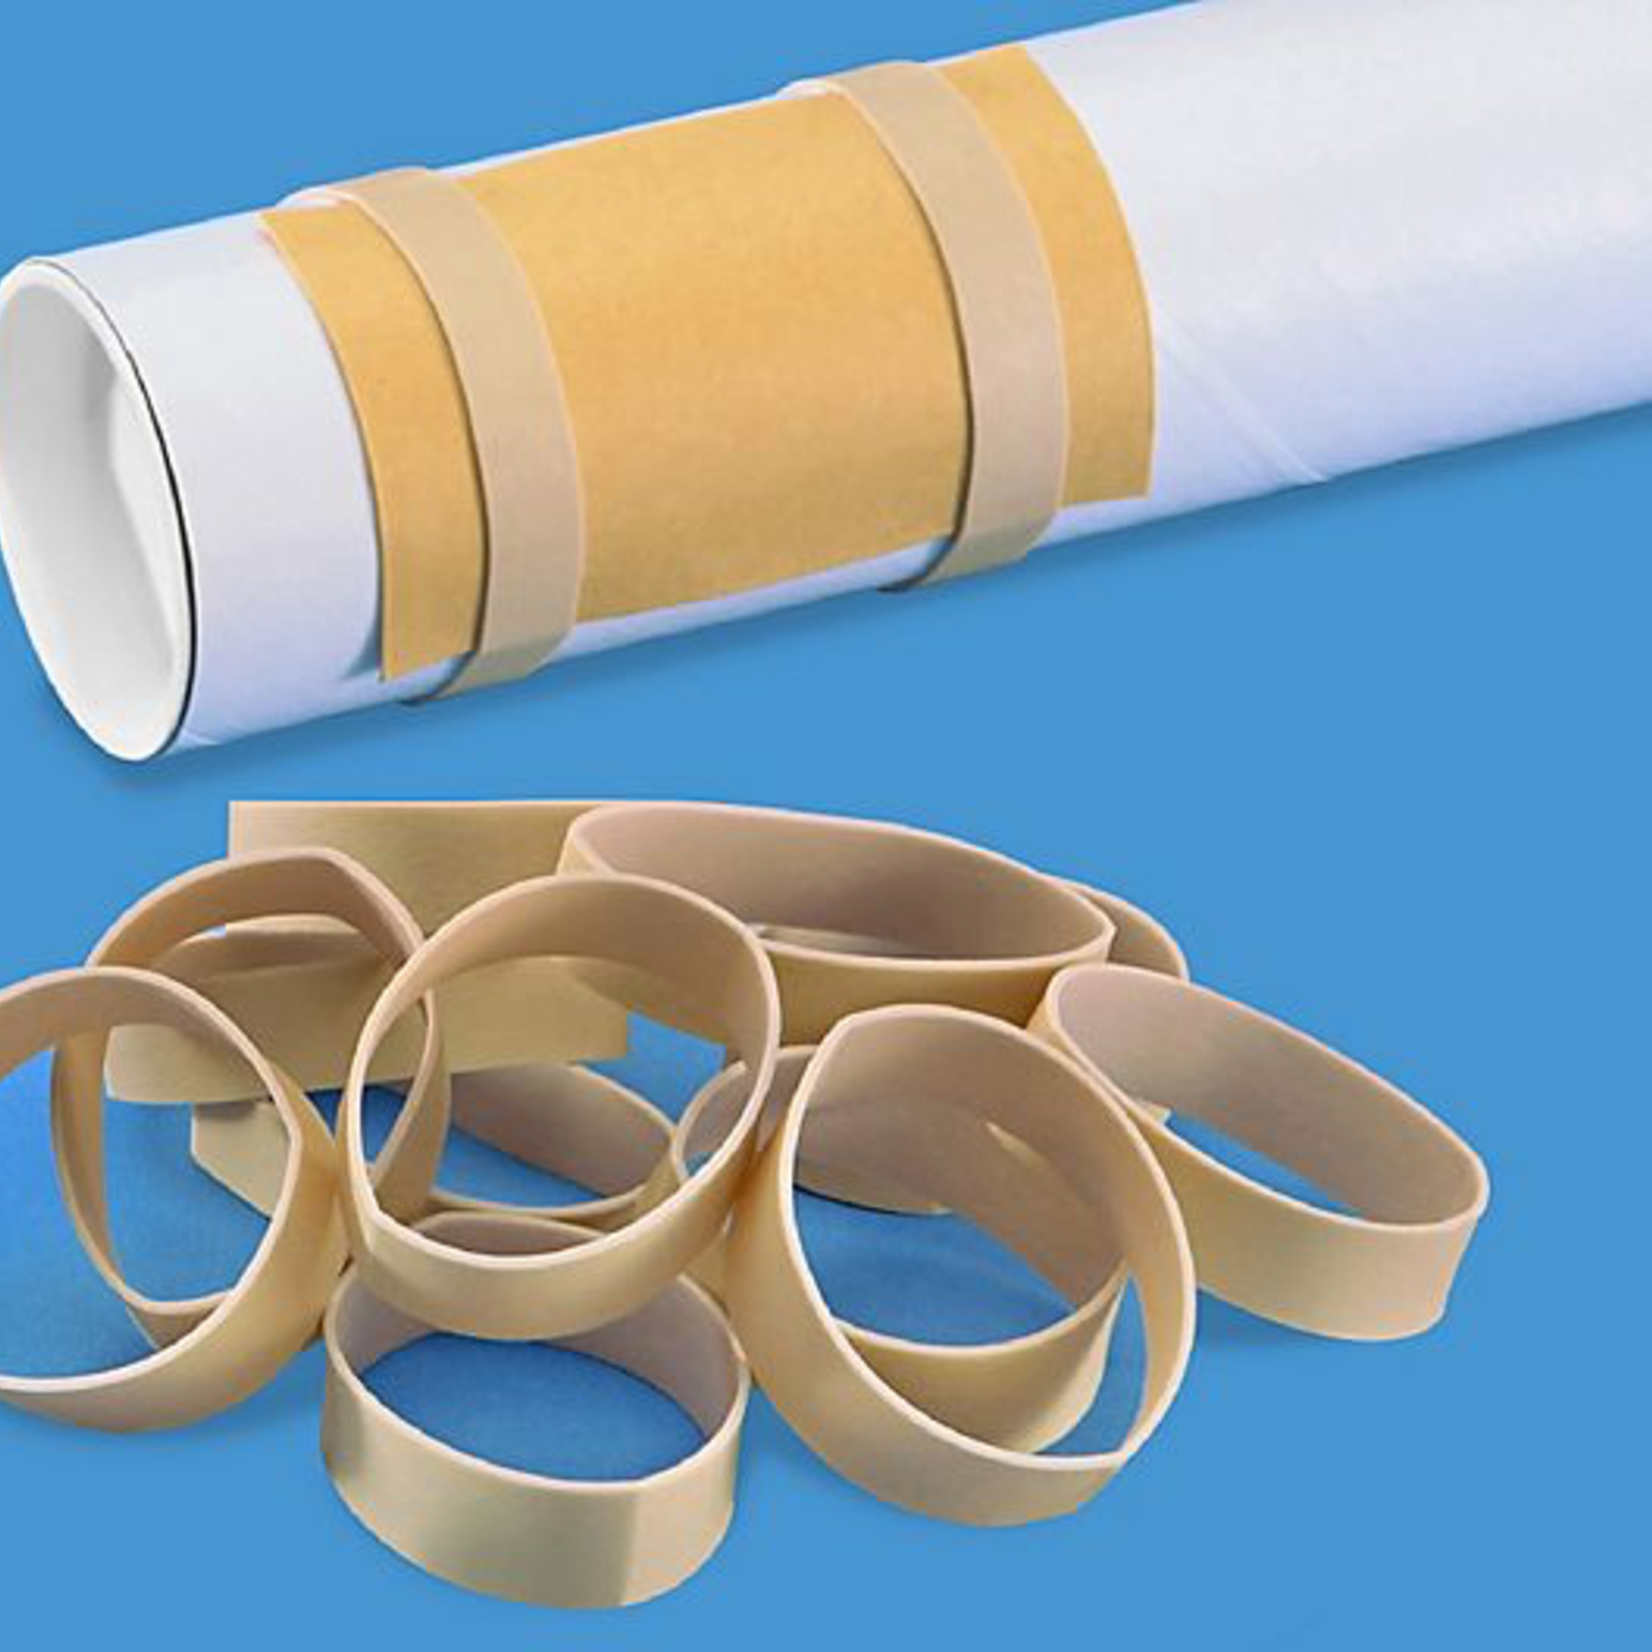 #82 1 POLY RUBBER BAND 2 1/2 X 1/2